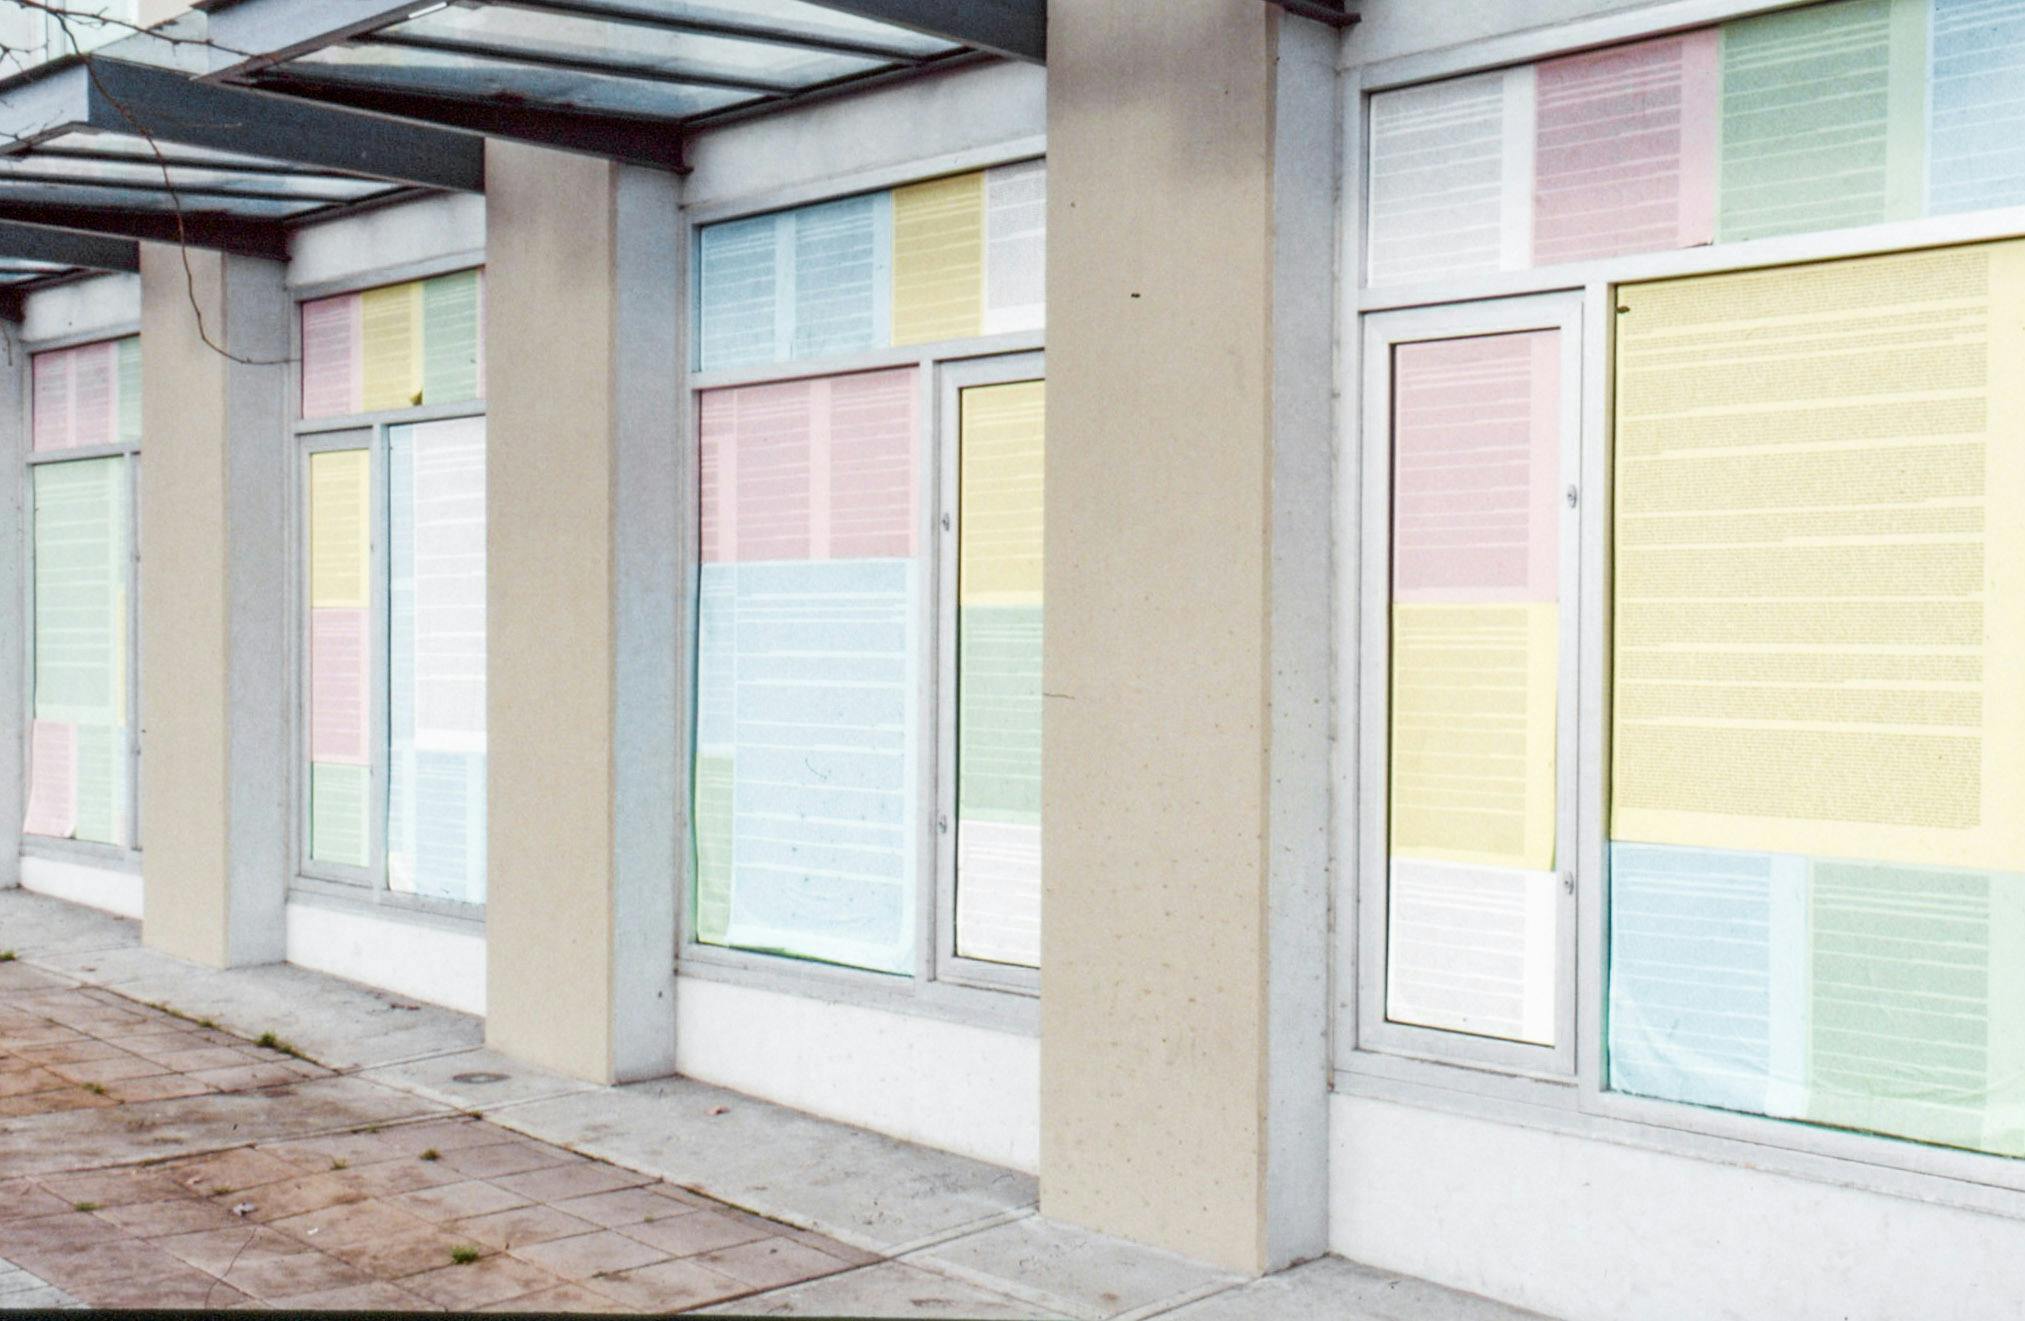 Texts printed on sheets of colourful paper cover the entire windows on CAG’s first floor. Some papers are much larger than the others. They are pink, yellow, blue, green, or white.